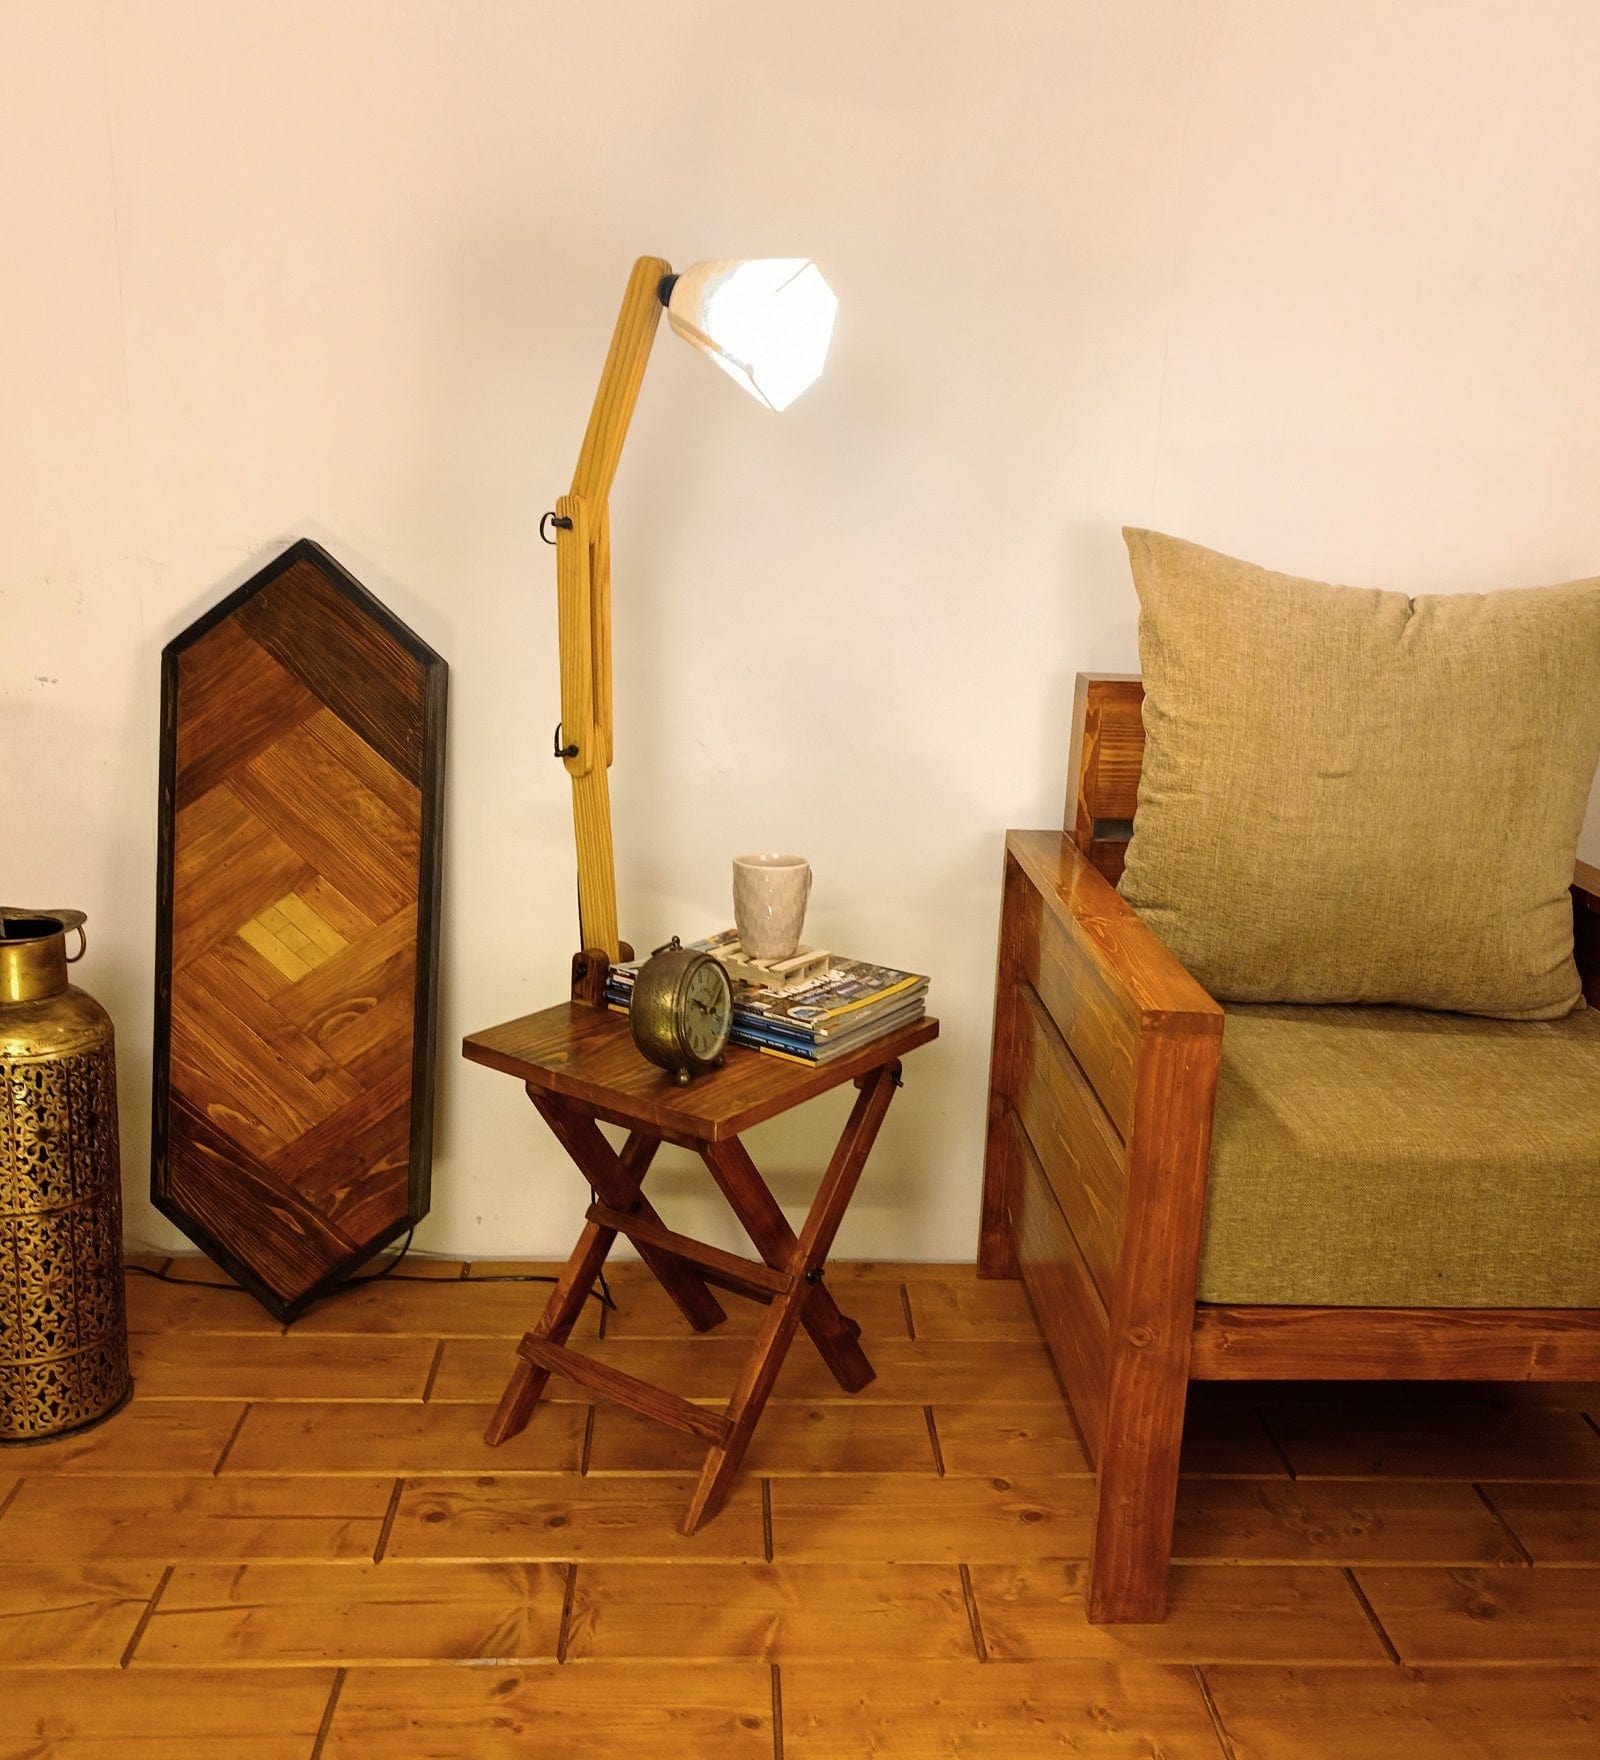 Regis Wooden Floor Lamp with Brown Base and Jute Fabric Lampshade (BULB NOT INCLUDED)